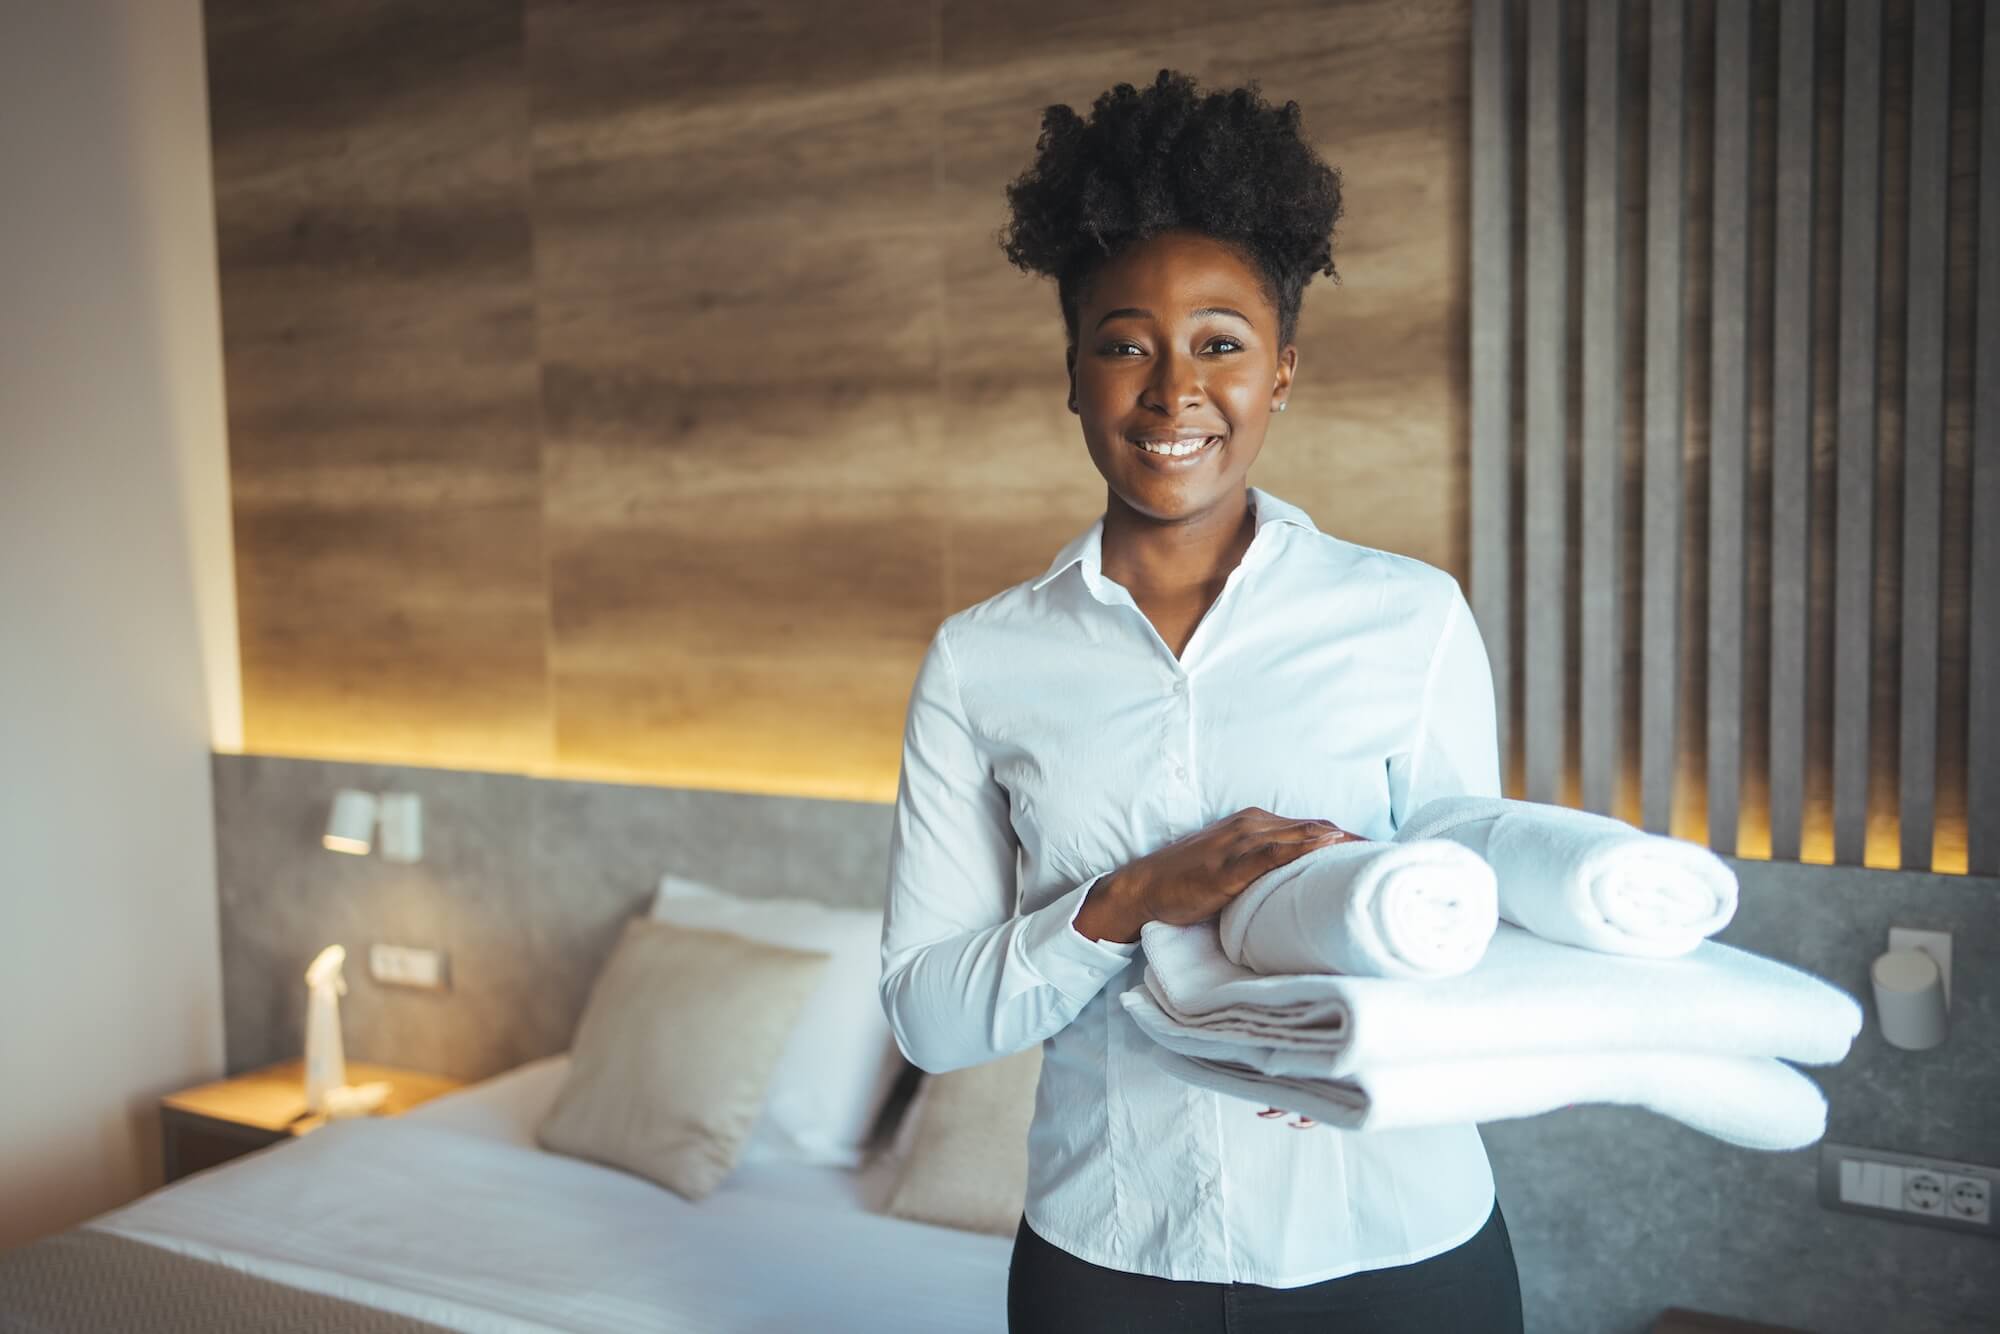 Kennesaw GA Housekeeping services, hire a housekeeper in Kennesaw GA, housekeeper jobs Kennesaw GA